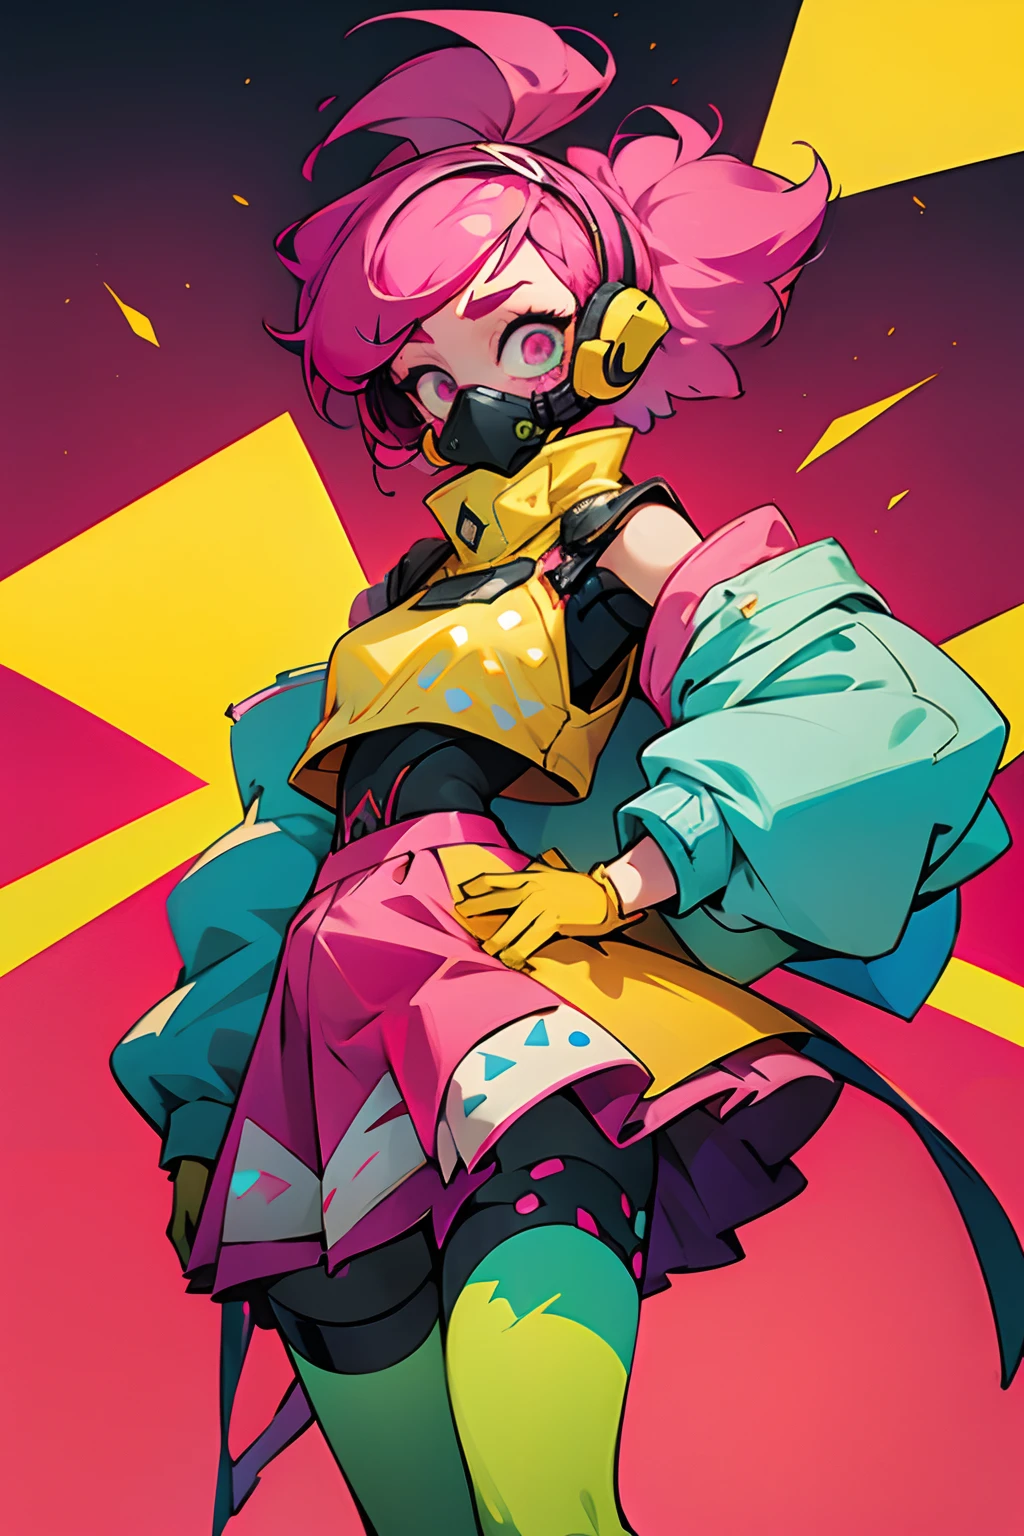 kpop girl with short nice fadecut pink hair, colorful glowing gass mask, lots of shapes attatched everywhere, random shapes mostly triangle, yellow skirt with polcadots, red gloves, and an 2 antena headband